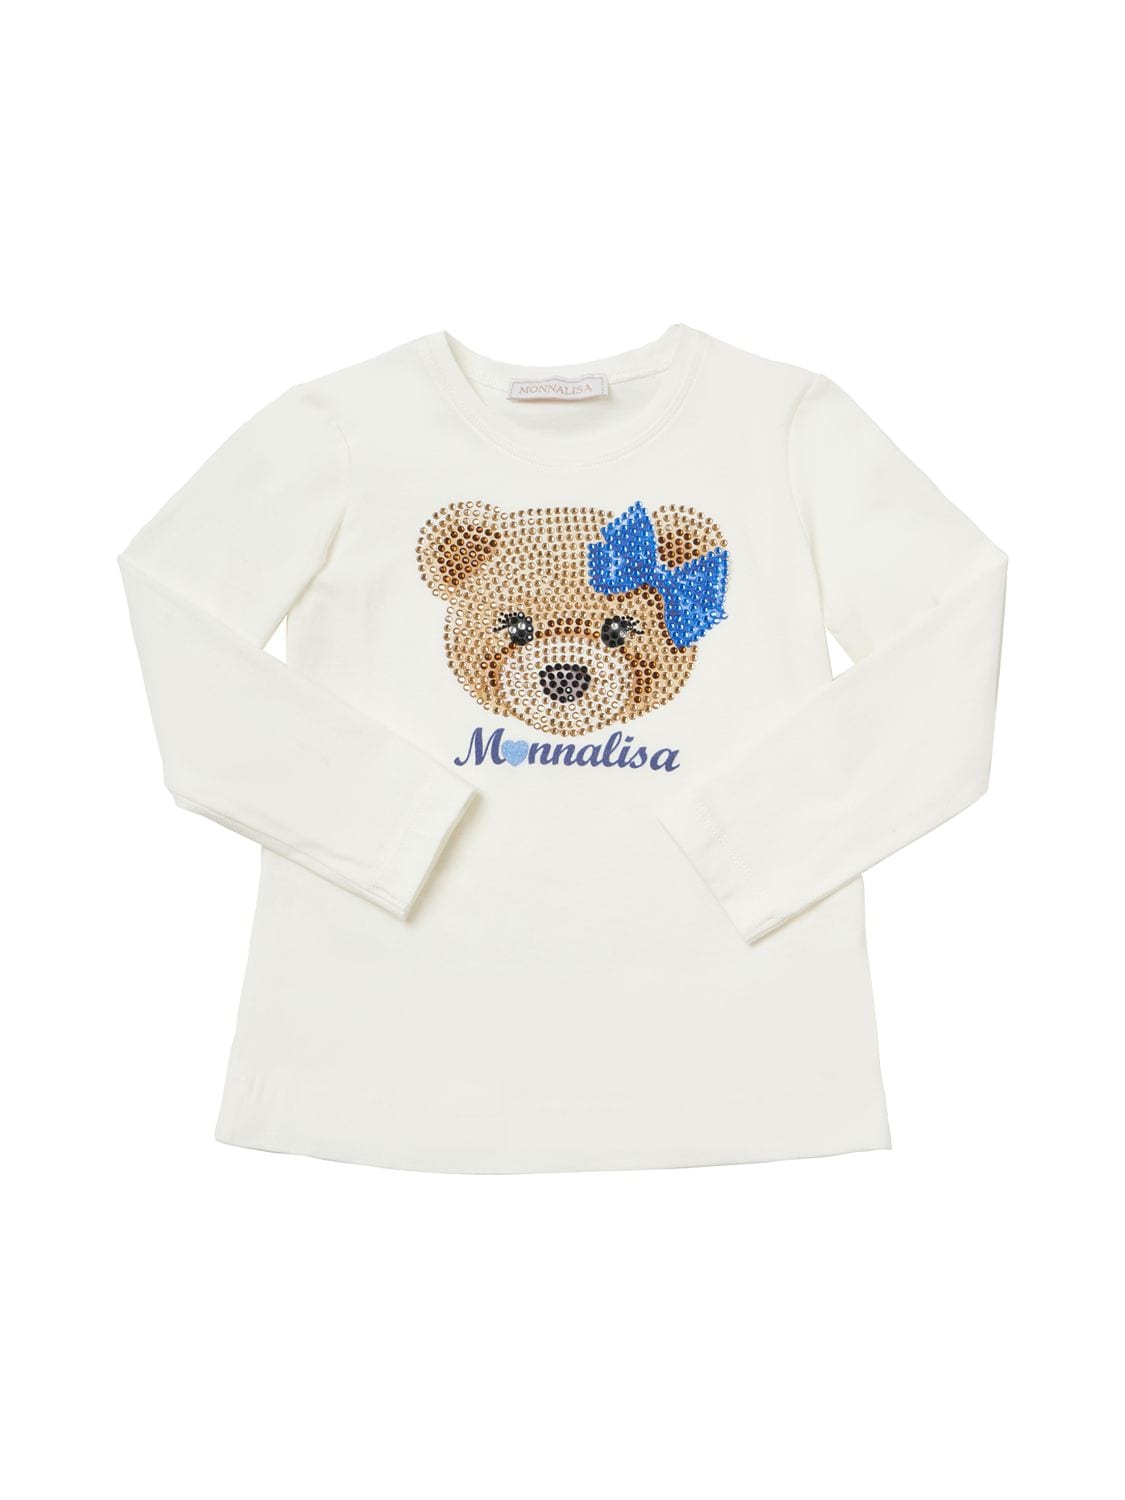 Monnalisa Kids' Printed Cotton Jersey T-shirt W/crystals In Multicolor